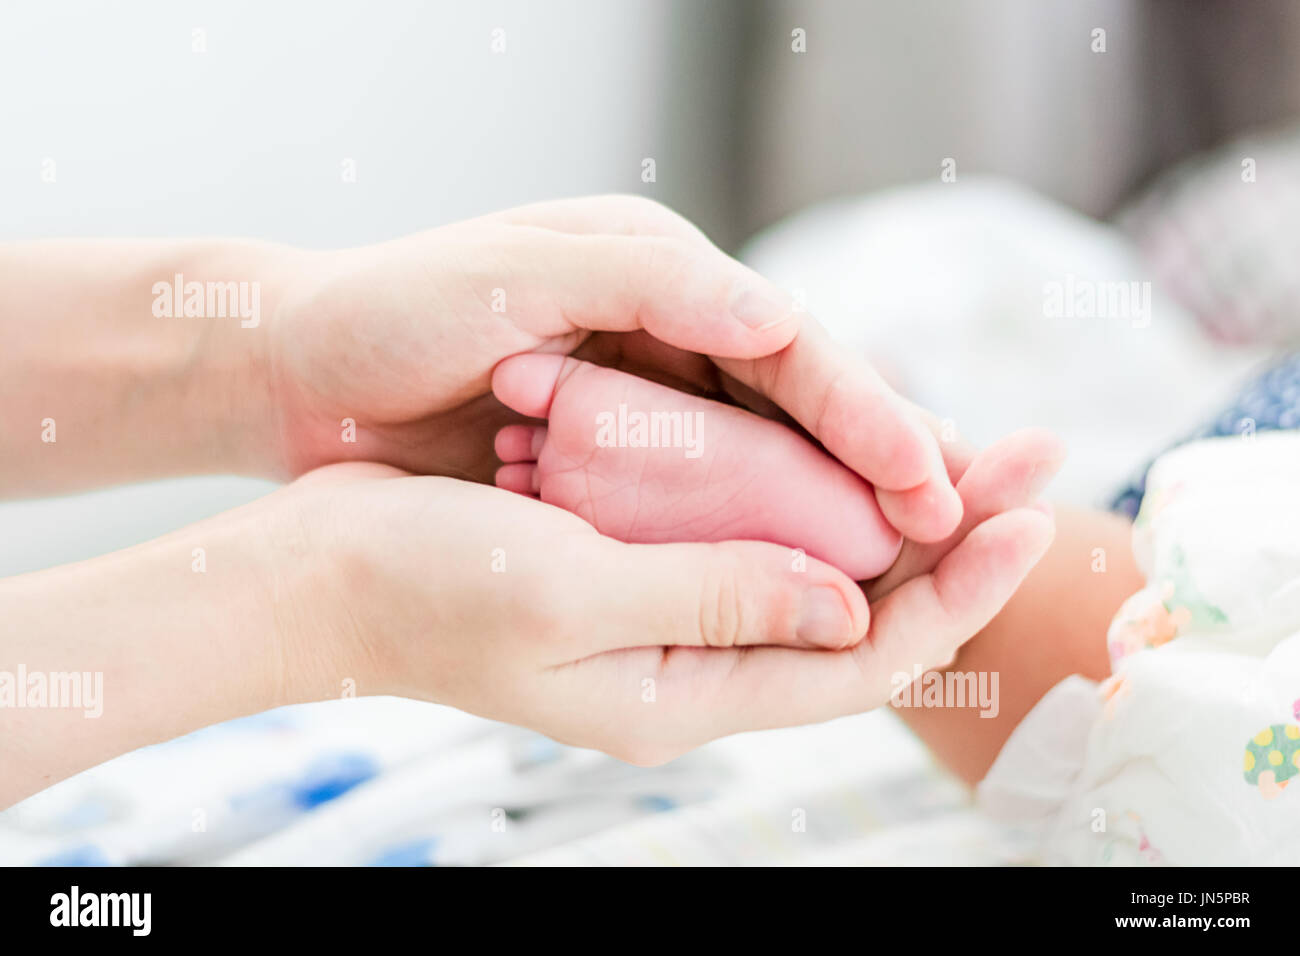 Baby feet in mother hands againt blurred background Stock Photo